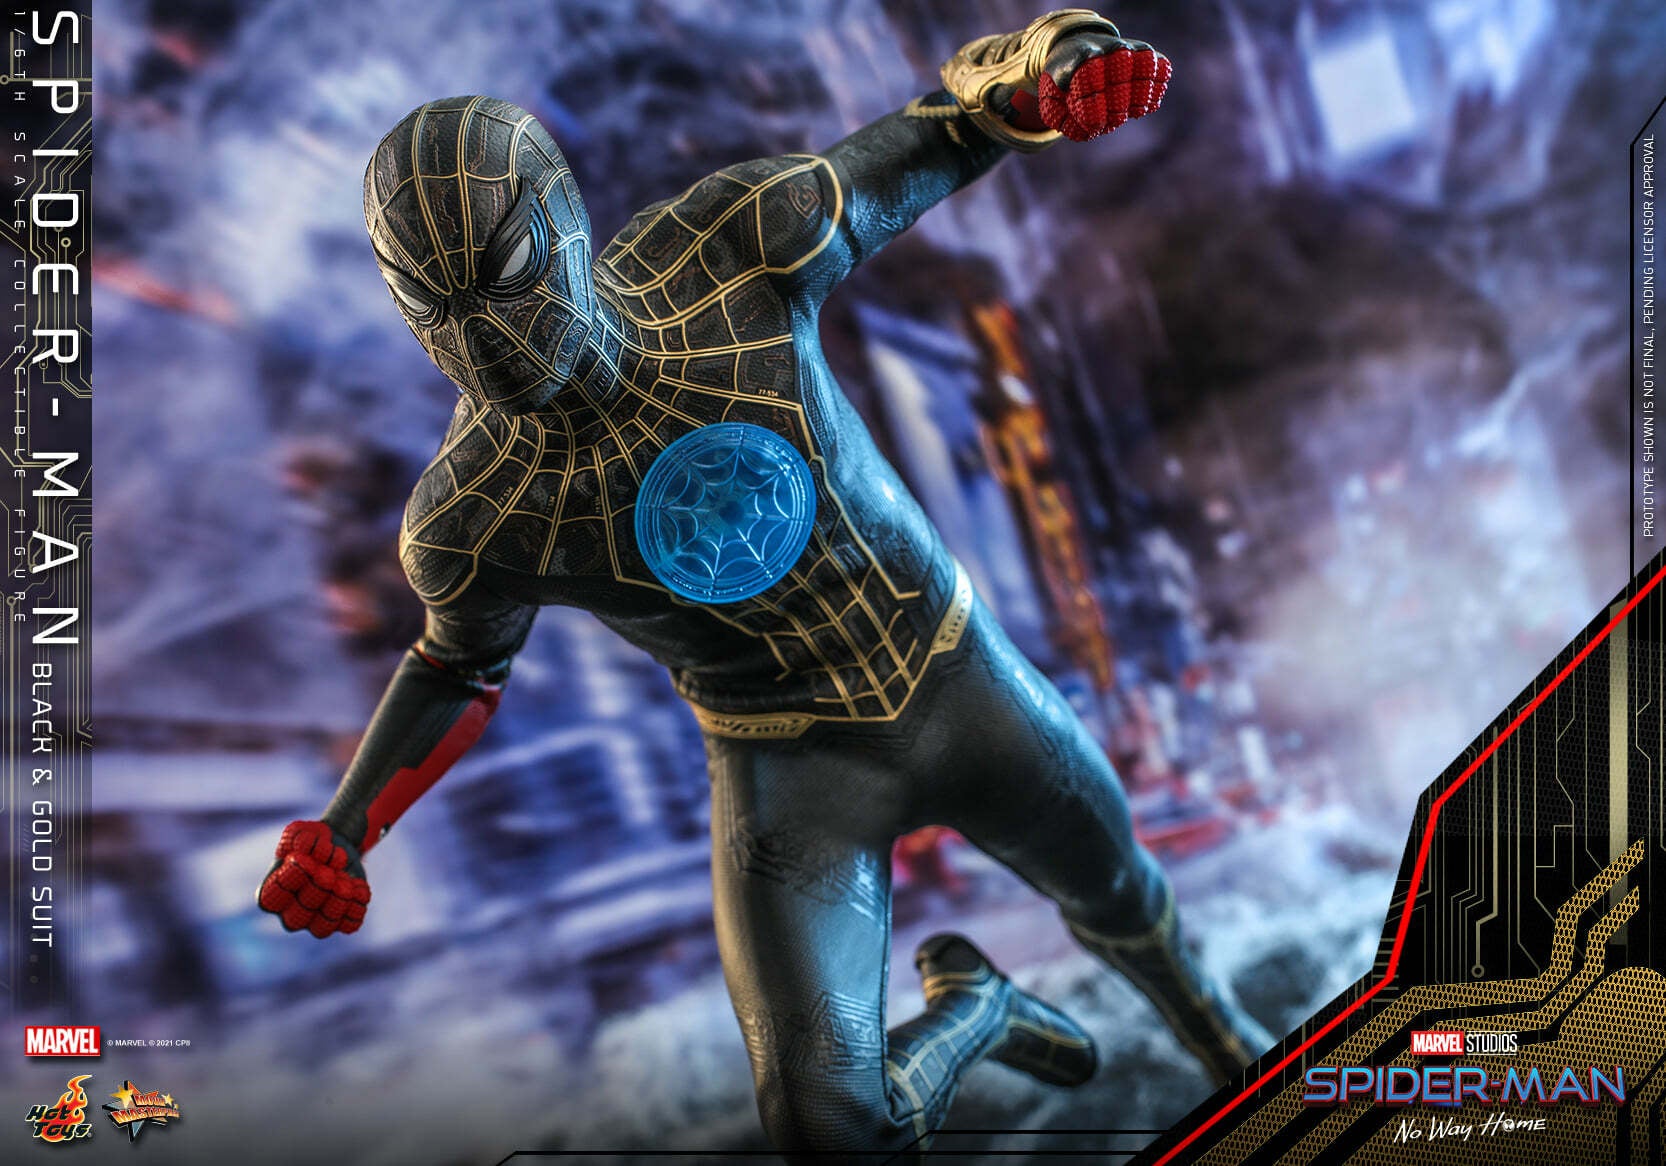 Seems like Spidey gets a new suit in No Way Home. (Image: Hot Toys)